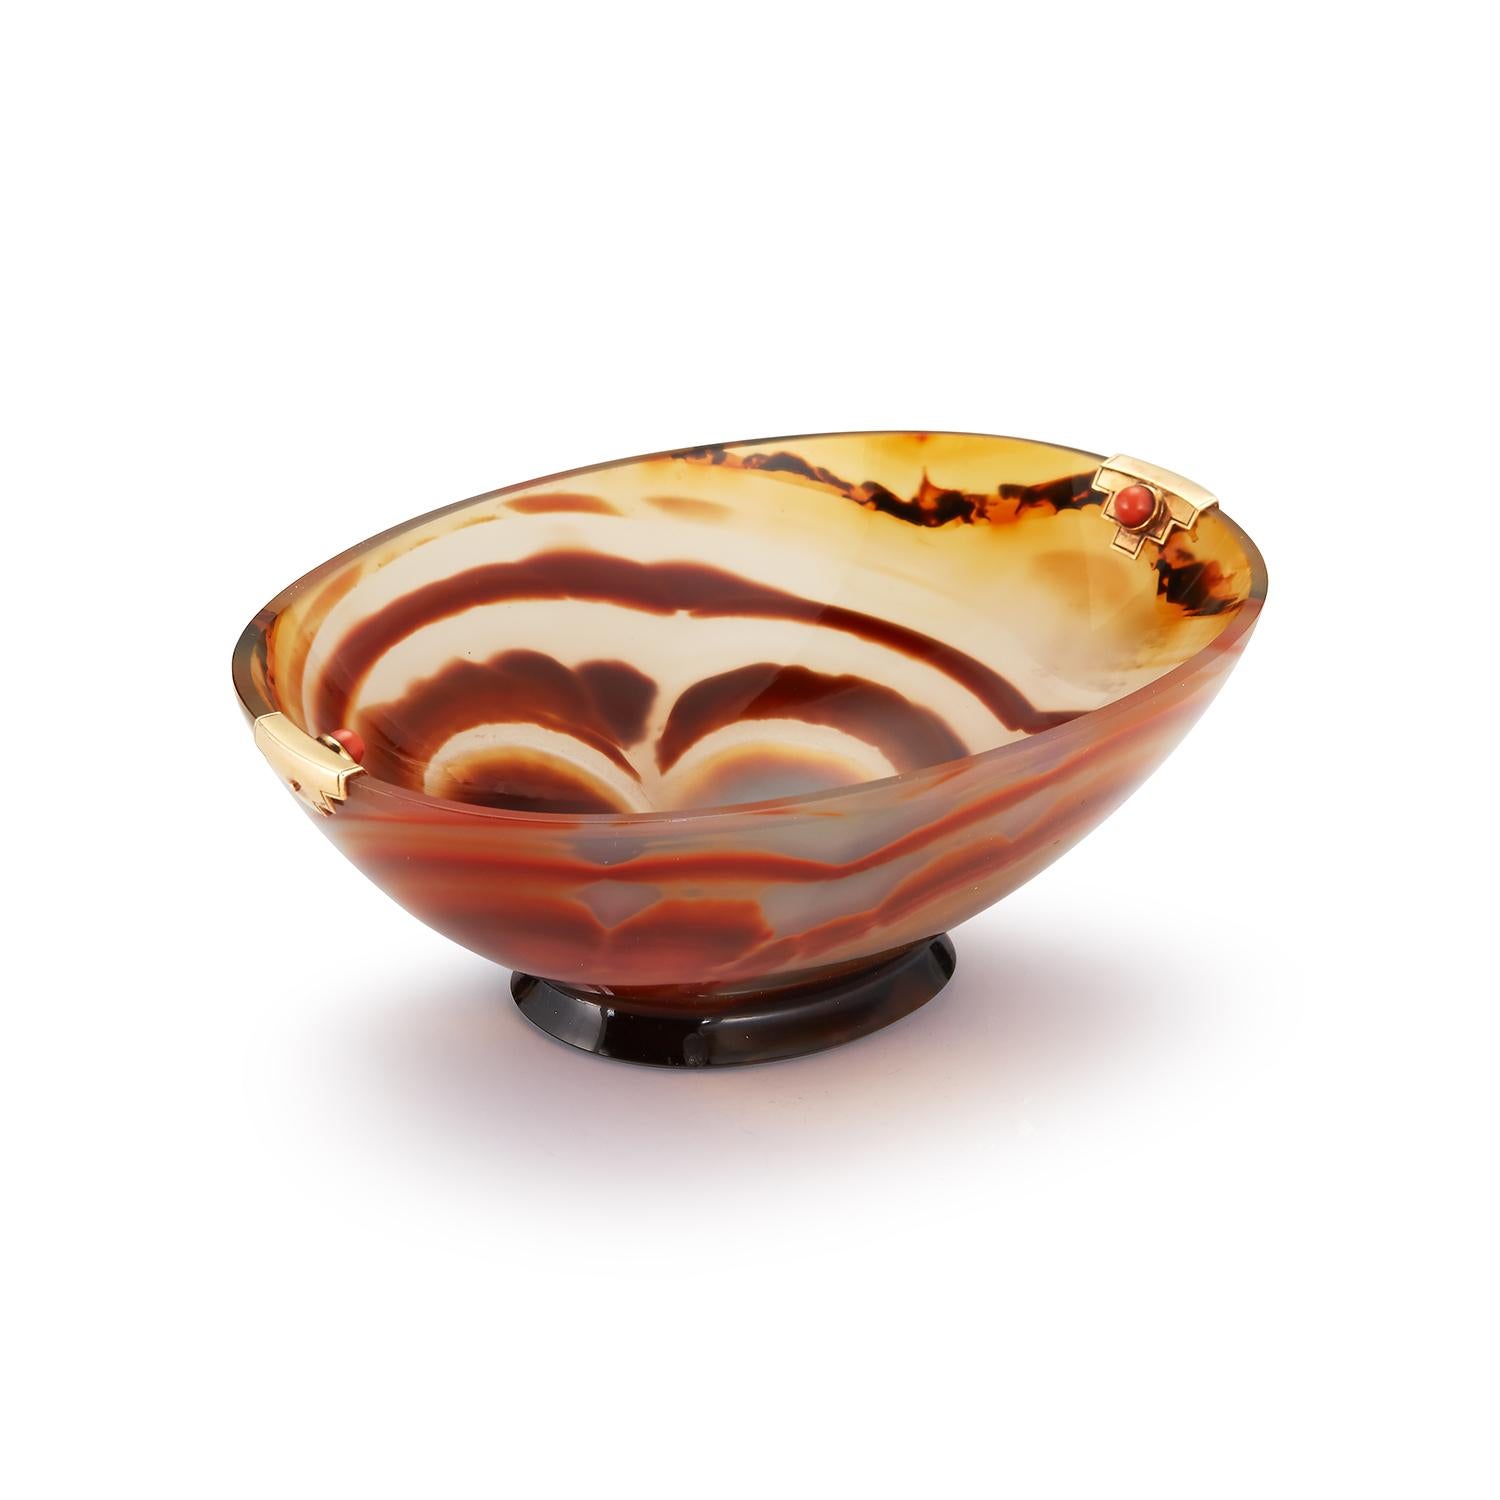 Cartier Art Deco Agate and Coral Bowl

Signed Cartier, numbered, and french hallmarked 
Measurements: length: 3.5” , width: 2.5”,  height: 1.5”